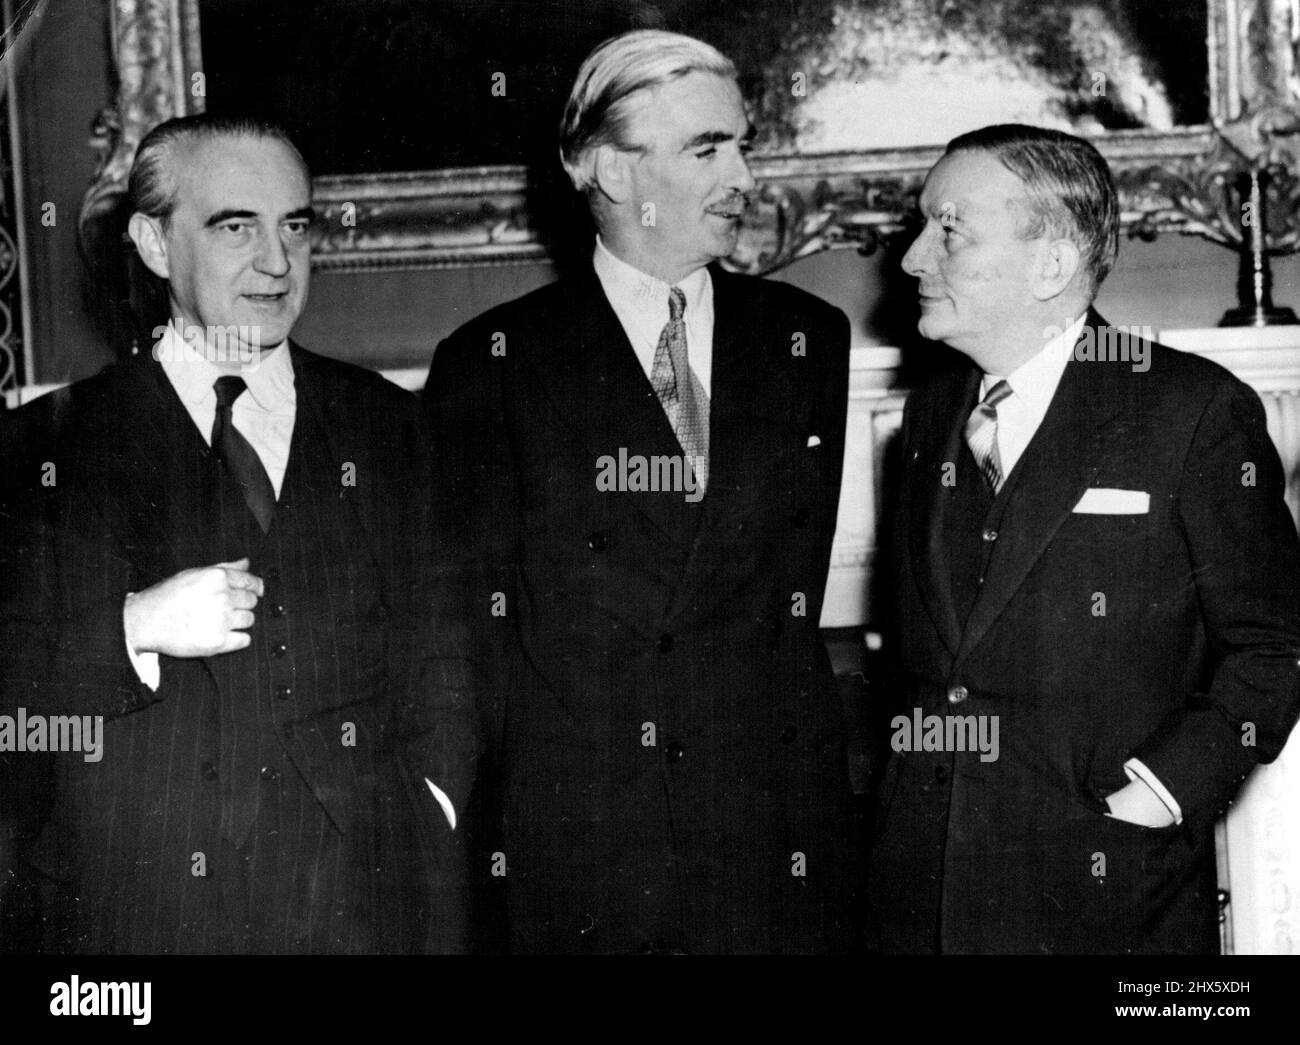 Bidault Meets Eden In London: French Foreign Minister Georges Bidault (right) with British Foreign Minister Anthony Eden (centre) and Mr. Herve Alphano (France) at the Foreign office in London to-day (Thursday).M. Bidault and M. Rene Mayer, French Premier, are in London for talks on Anglo-French relations concerning the European Defence Community. February 12, 1953. (Photo by Reuterphoto). Stock Photo